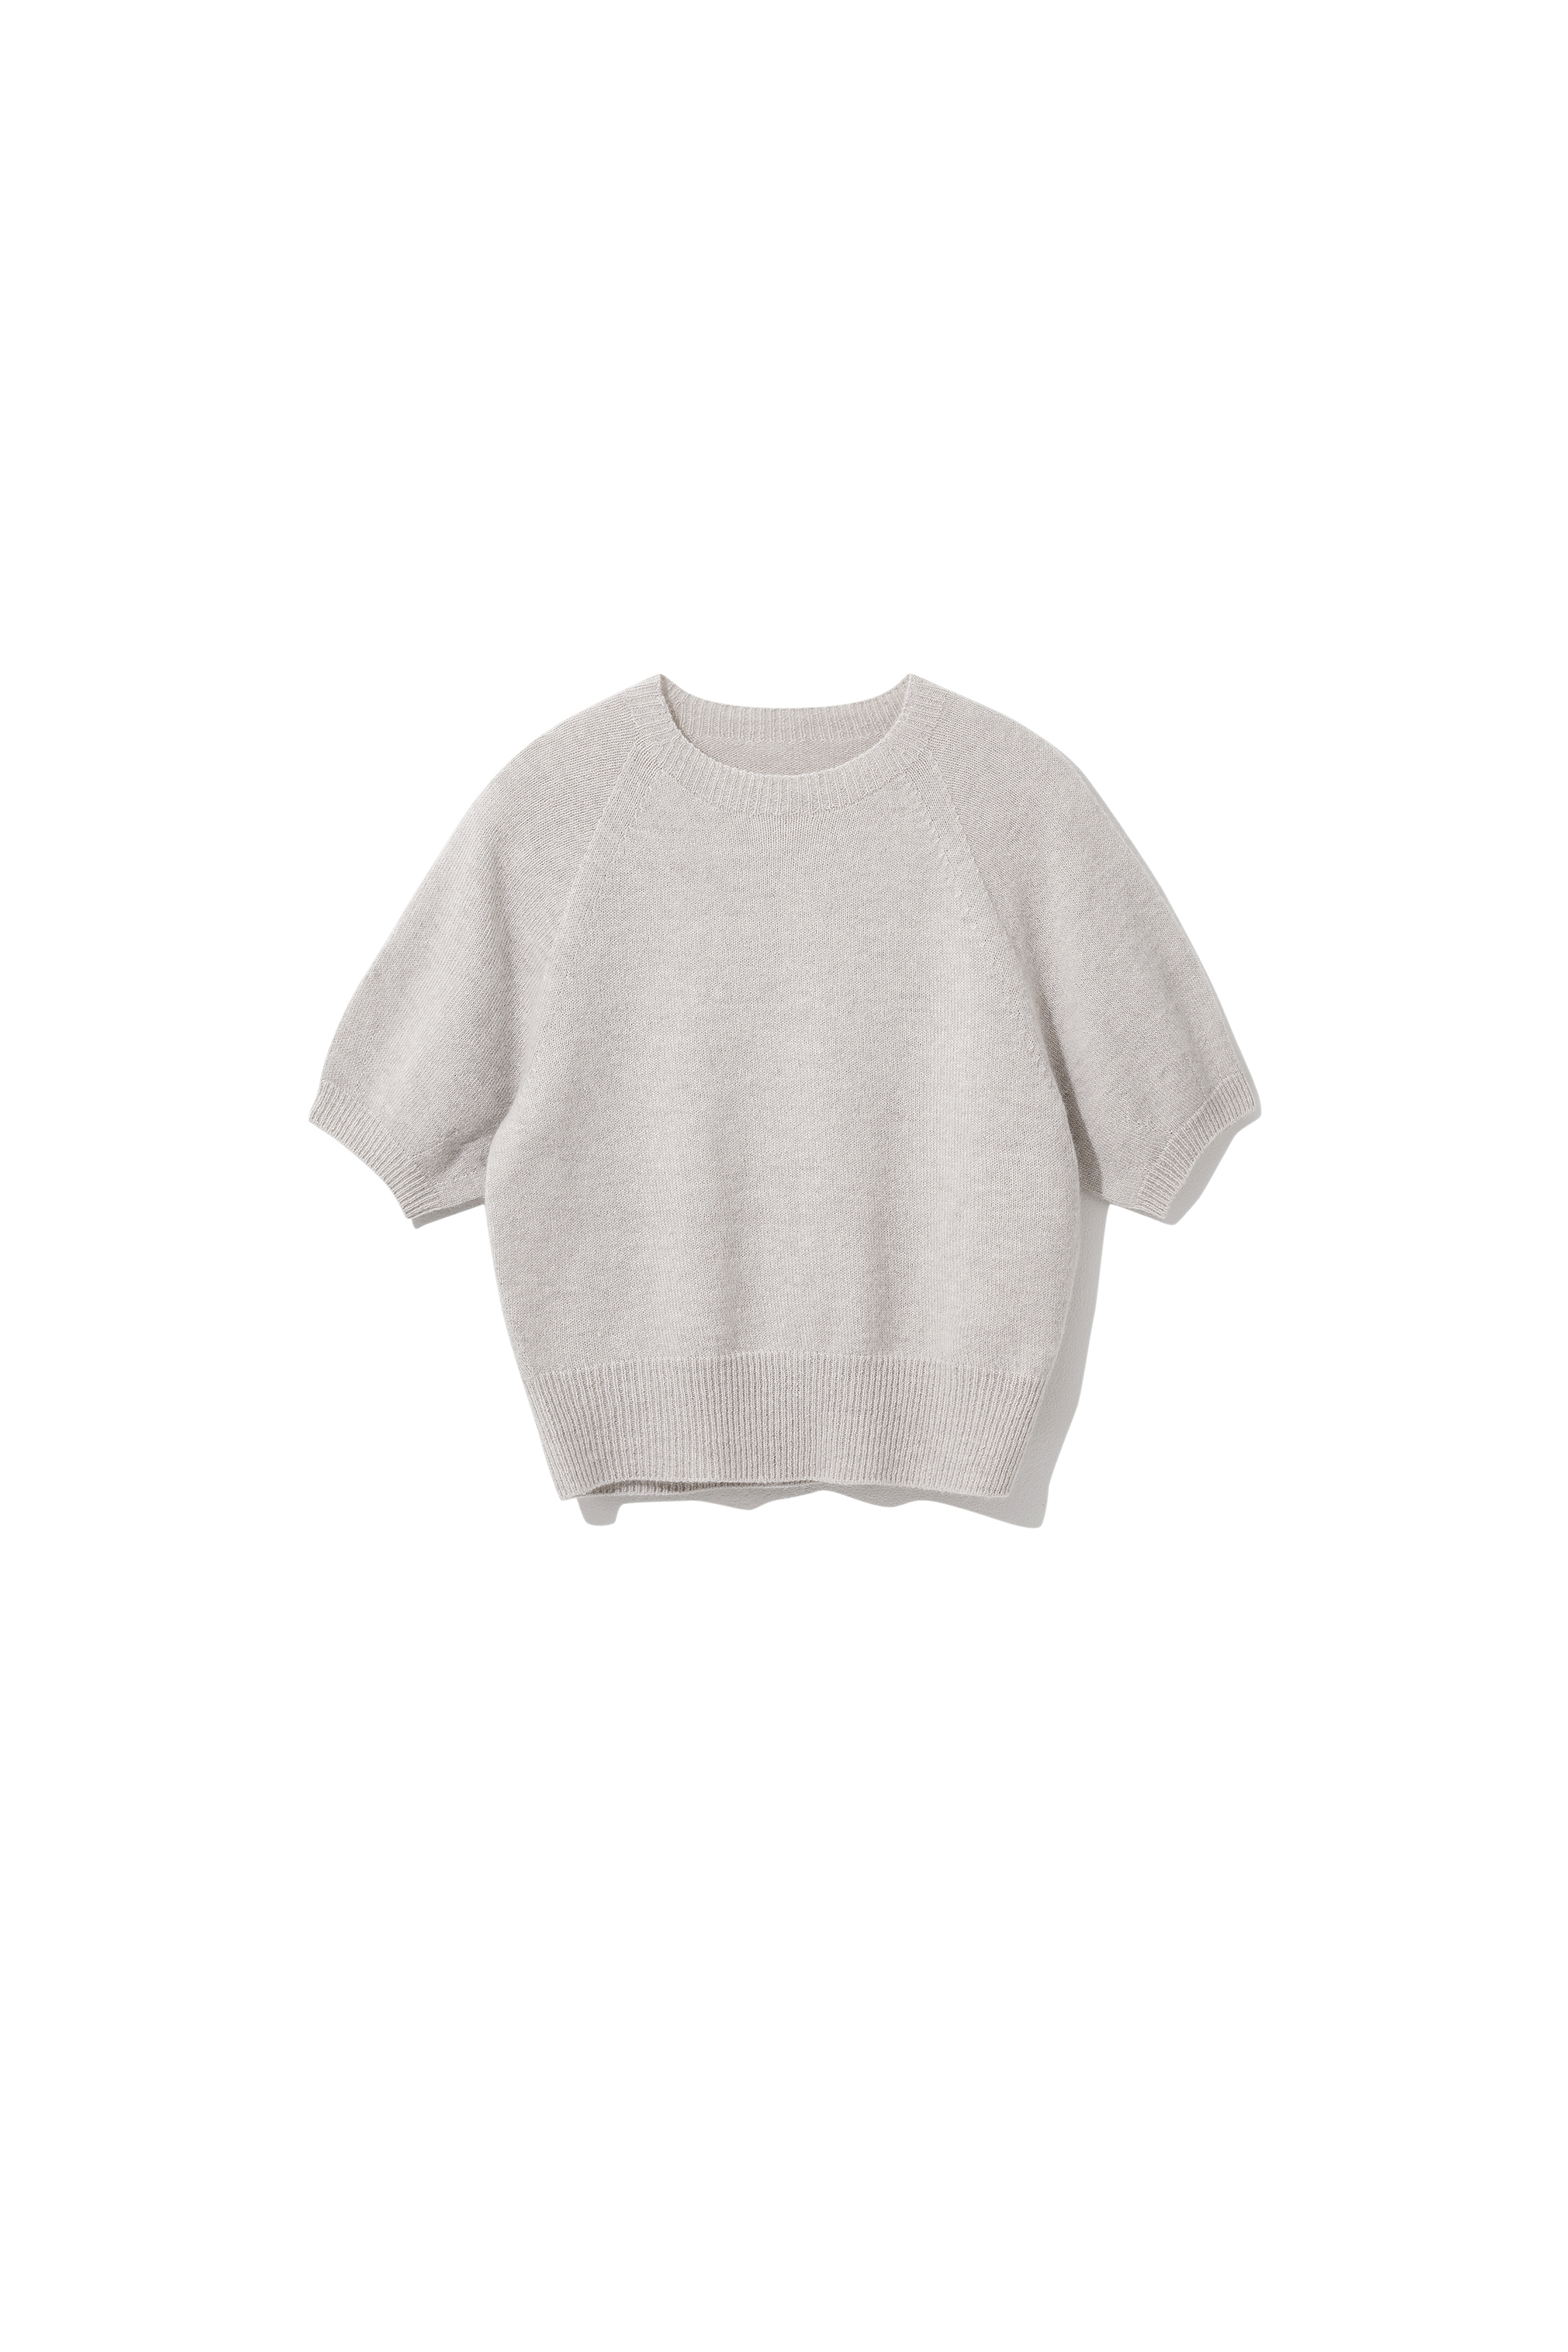 Mong Puff Sleeve Knitted P/O Greige